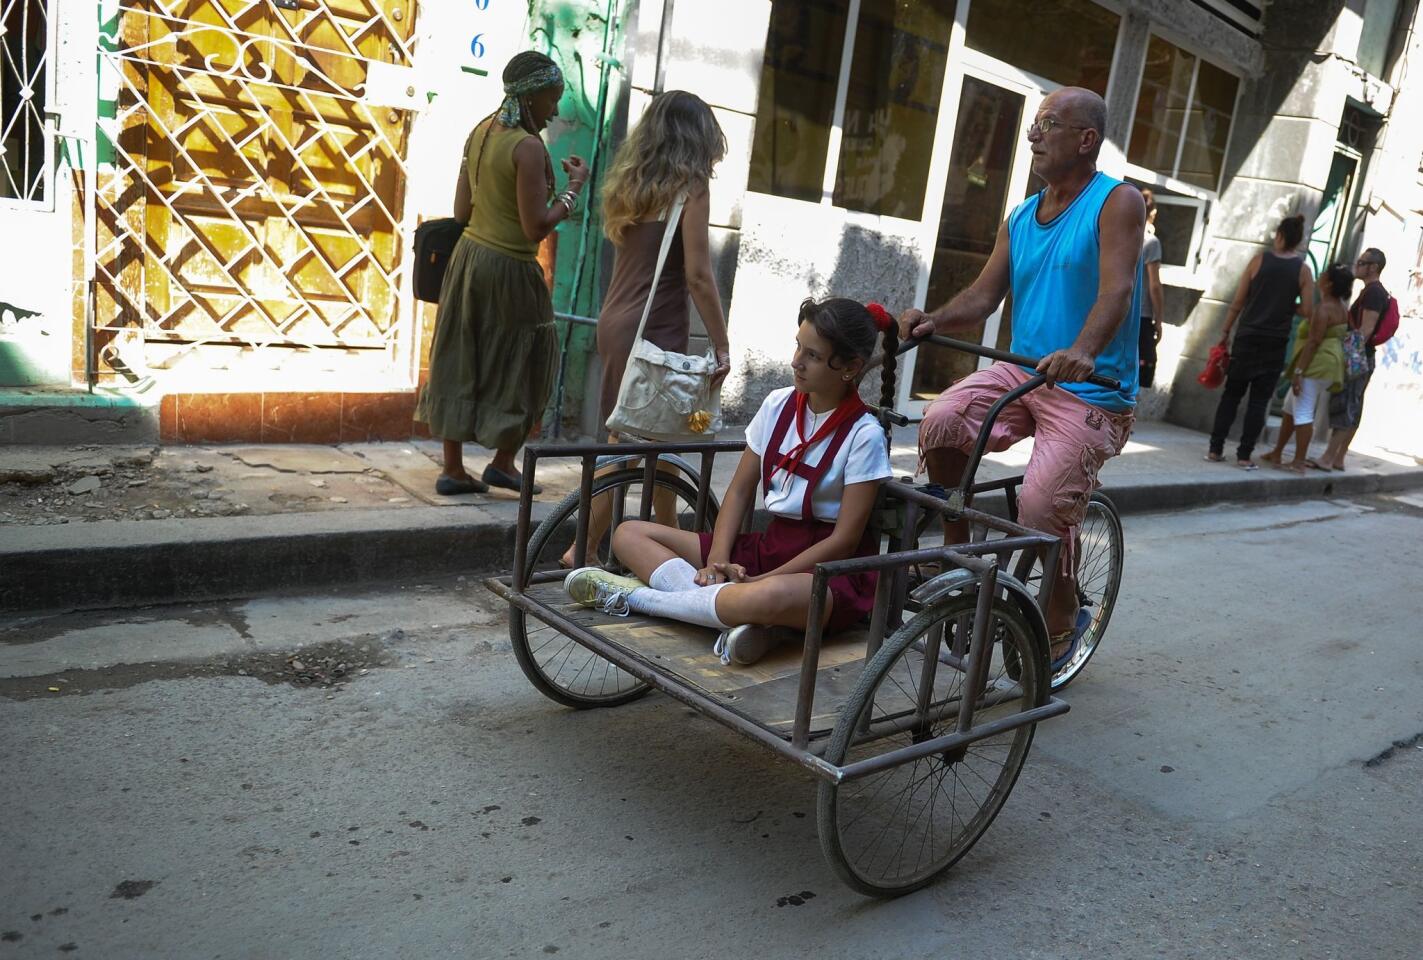 A man rides a tricycle with a child along a street of Havana on March 17, 2016.